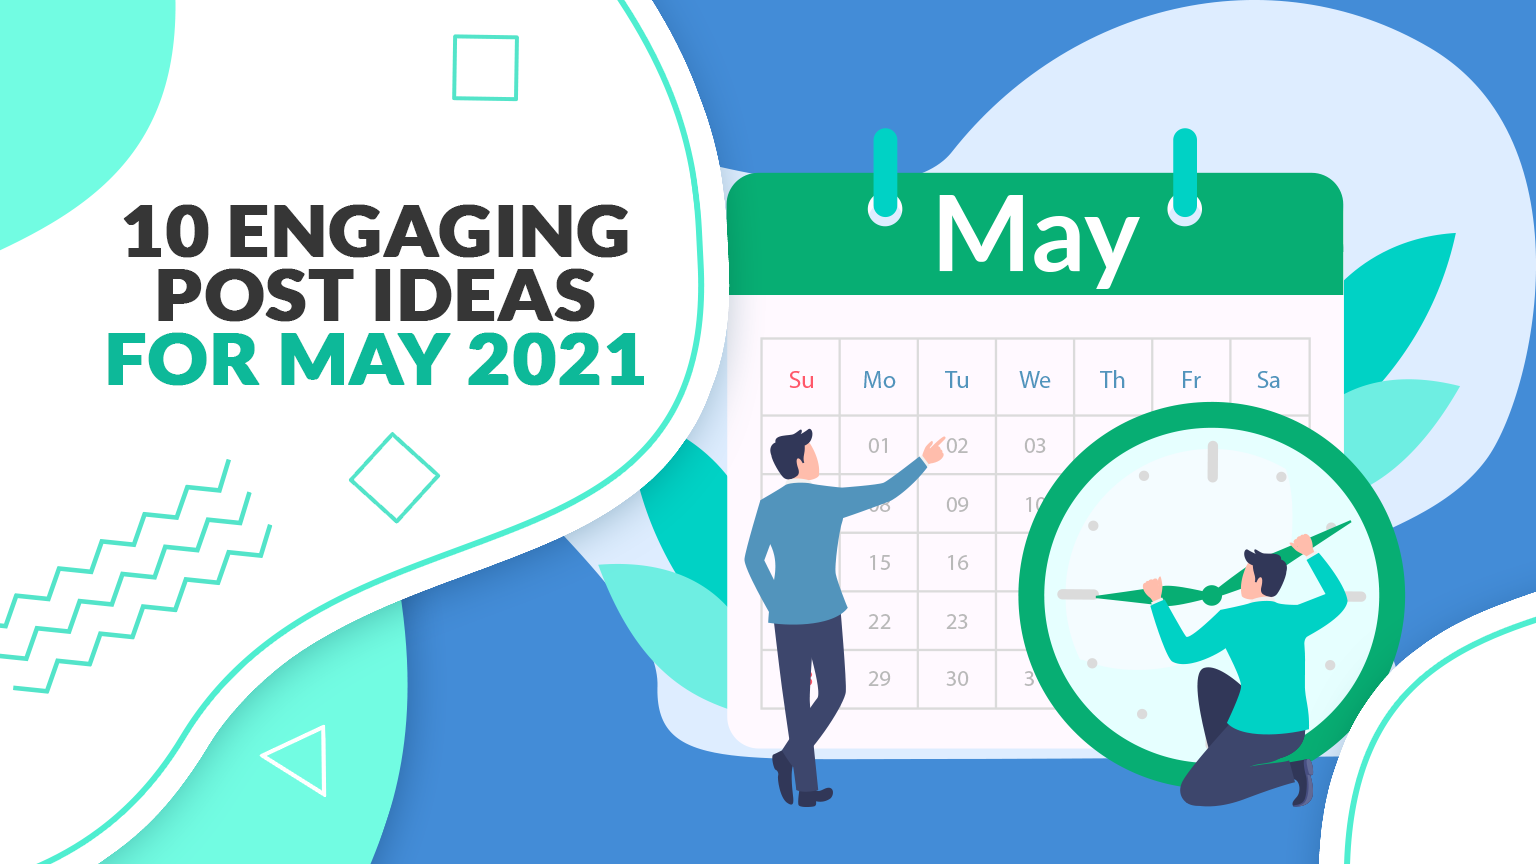 Creative post ideas for May 2021